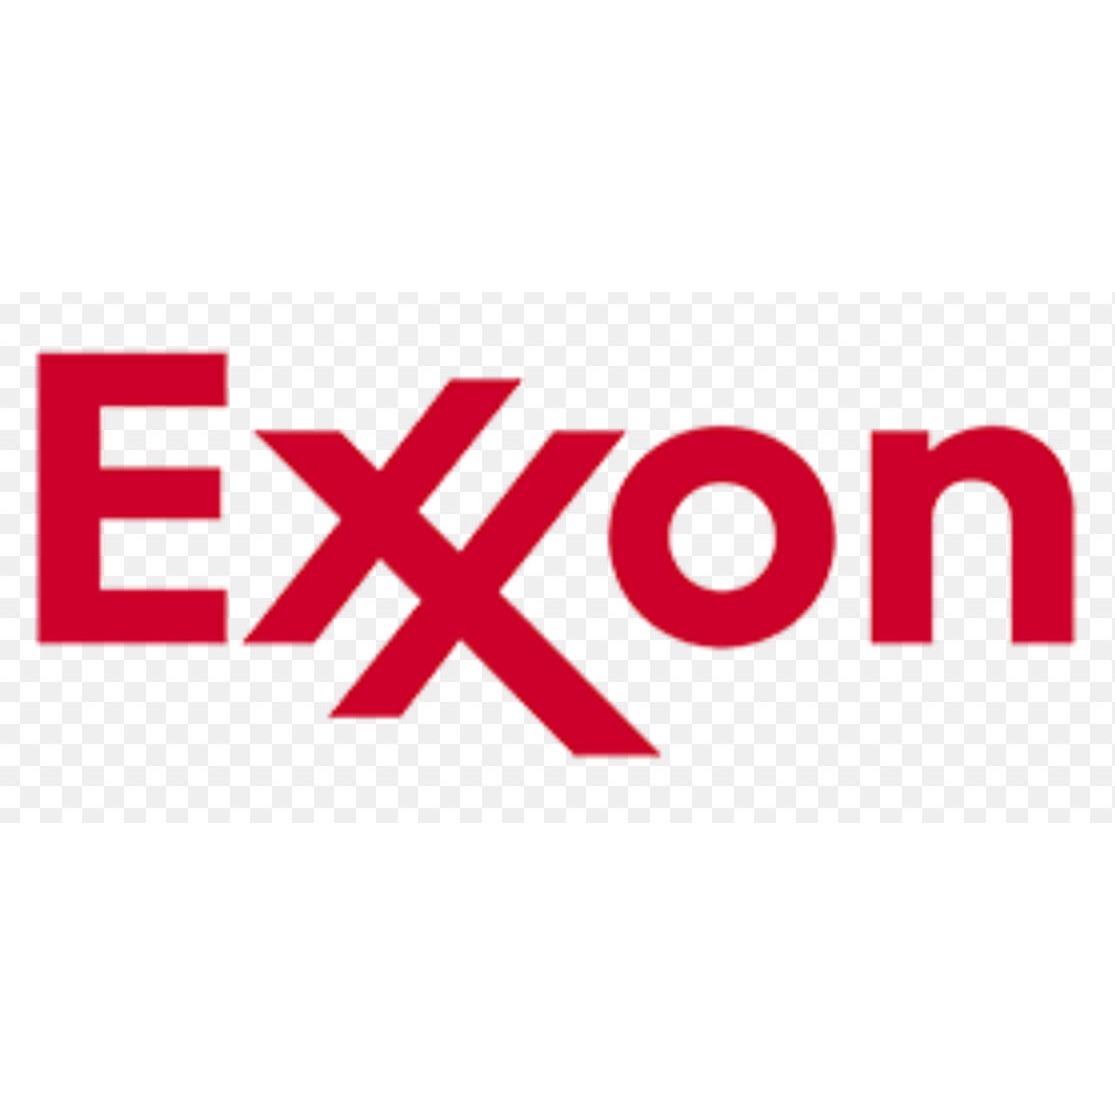 Exxon - Hagerstown, MD 21740 - (301)393-9280 | ShowMeLocal.com